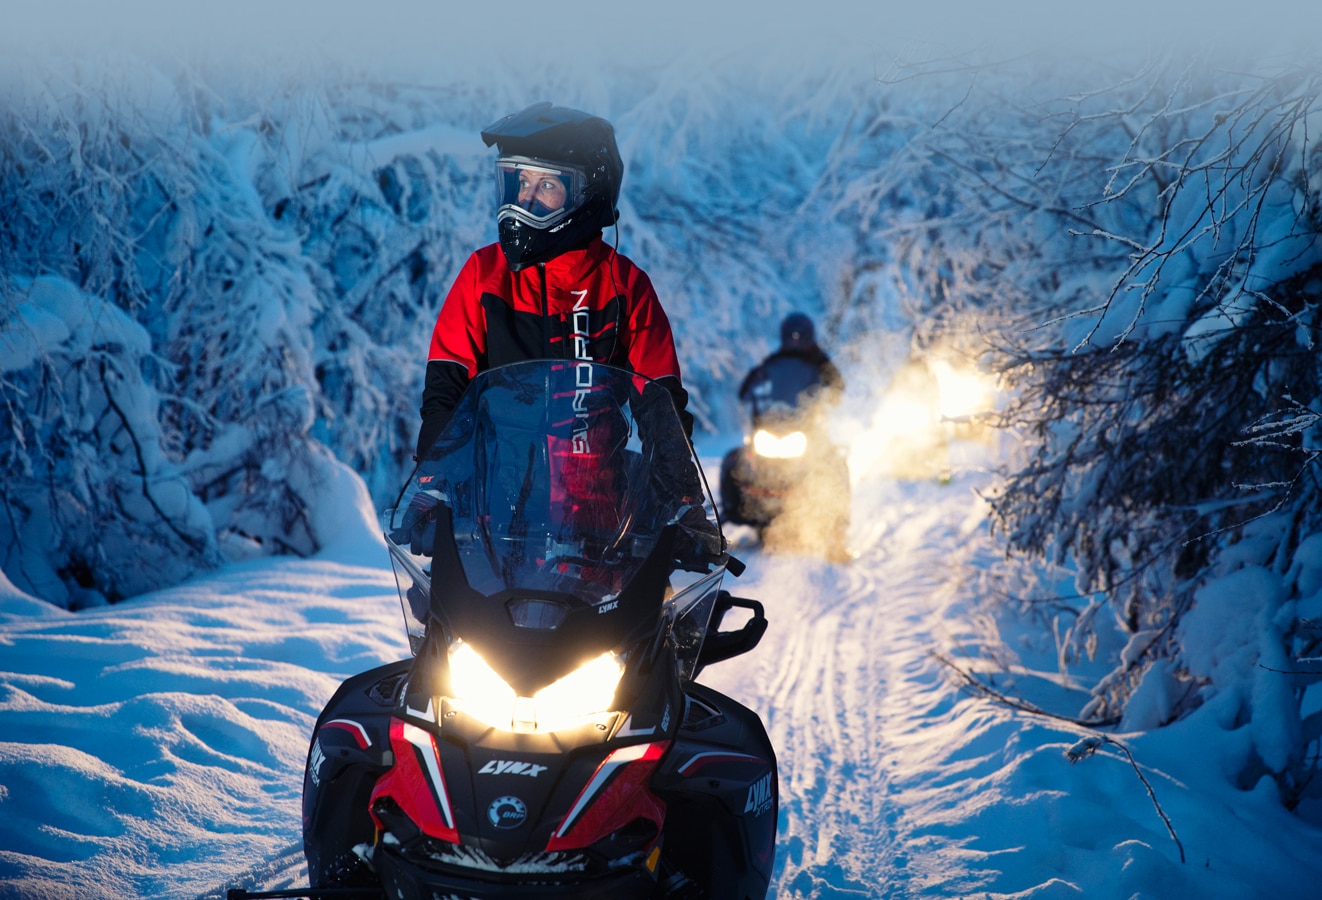 A group of drivers follow a snowy path in the forest with their Lynx Xtrim Snowmobile Model